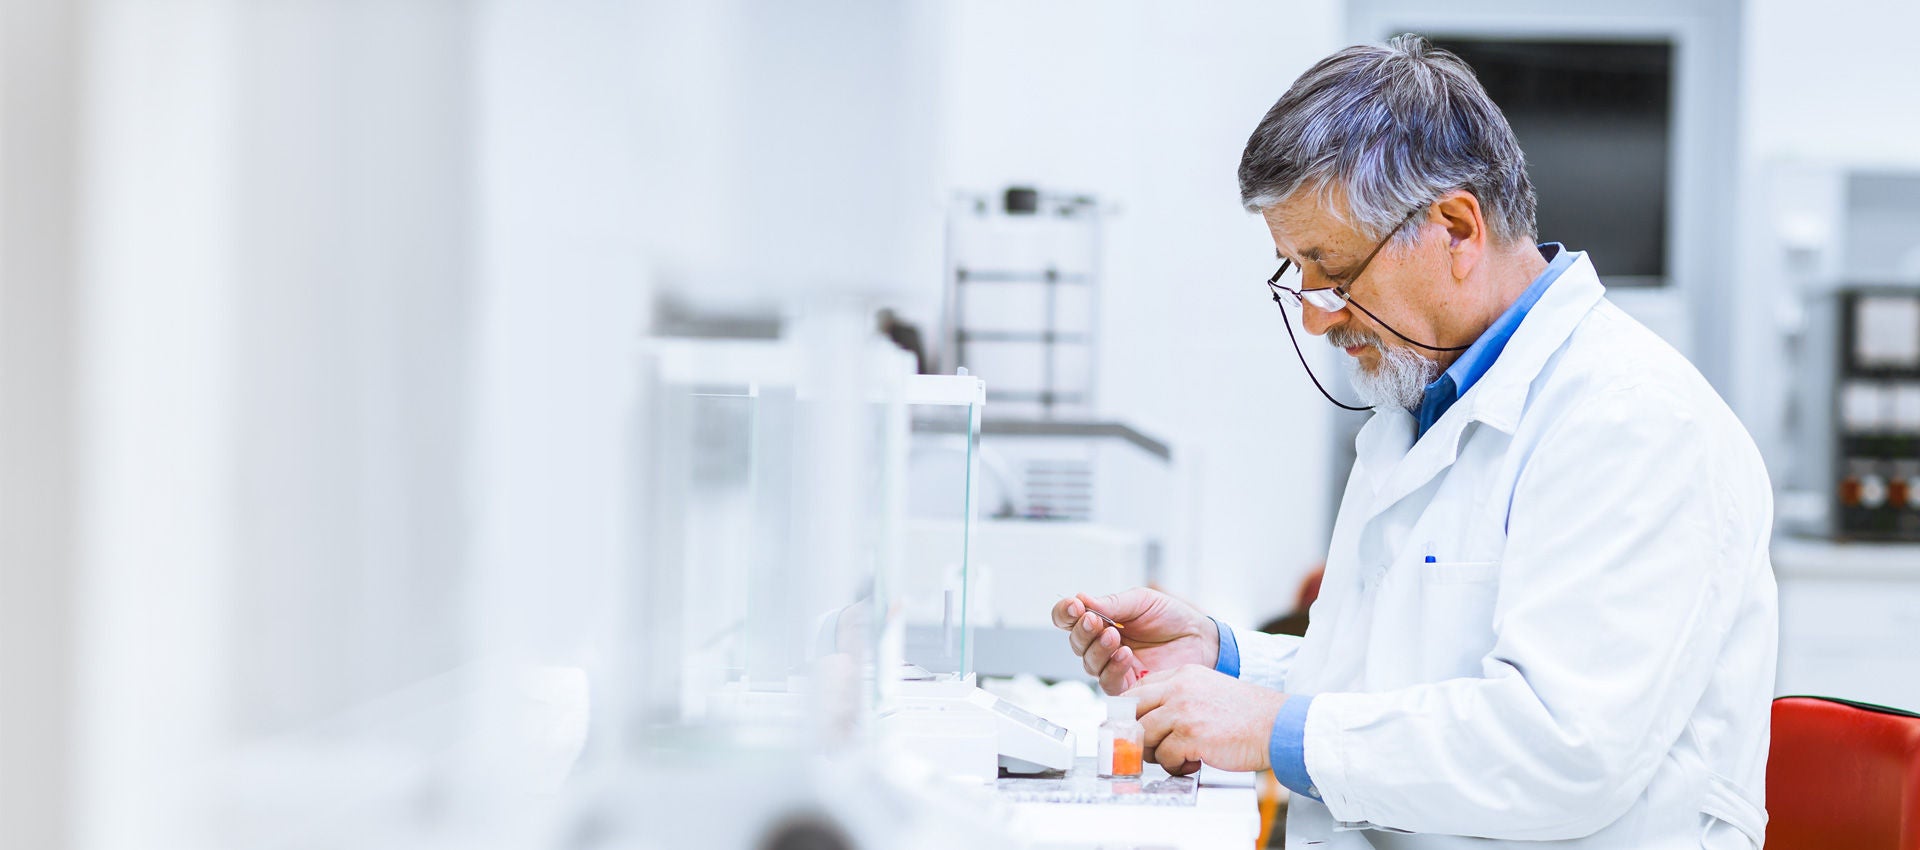 A scientist works on a biosciences project in a laboratory.